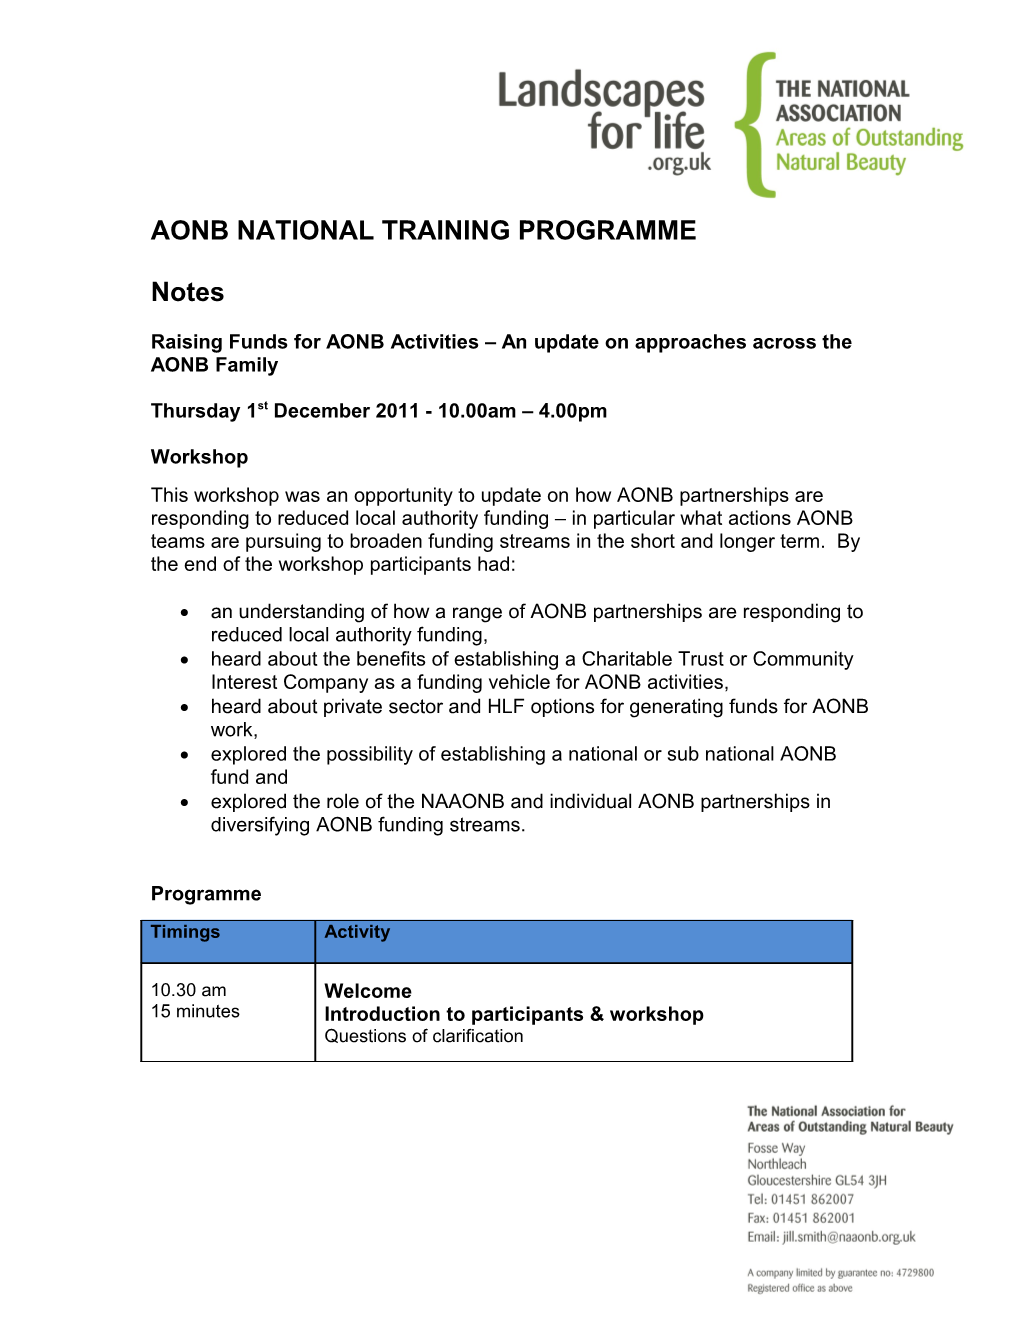 Raising Funds for AONB Activities an Update on Approaches Across the AONB Family